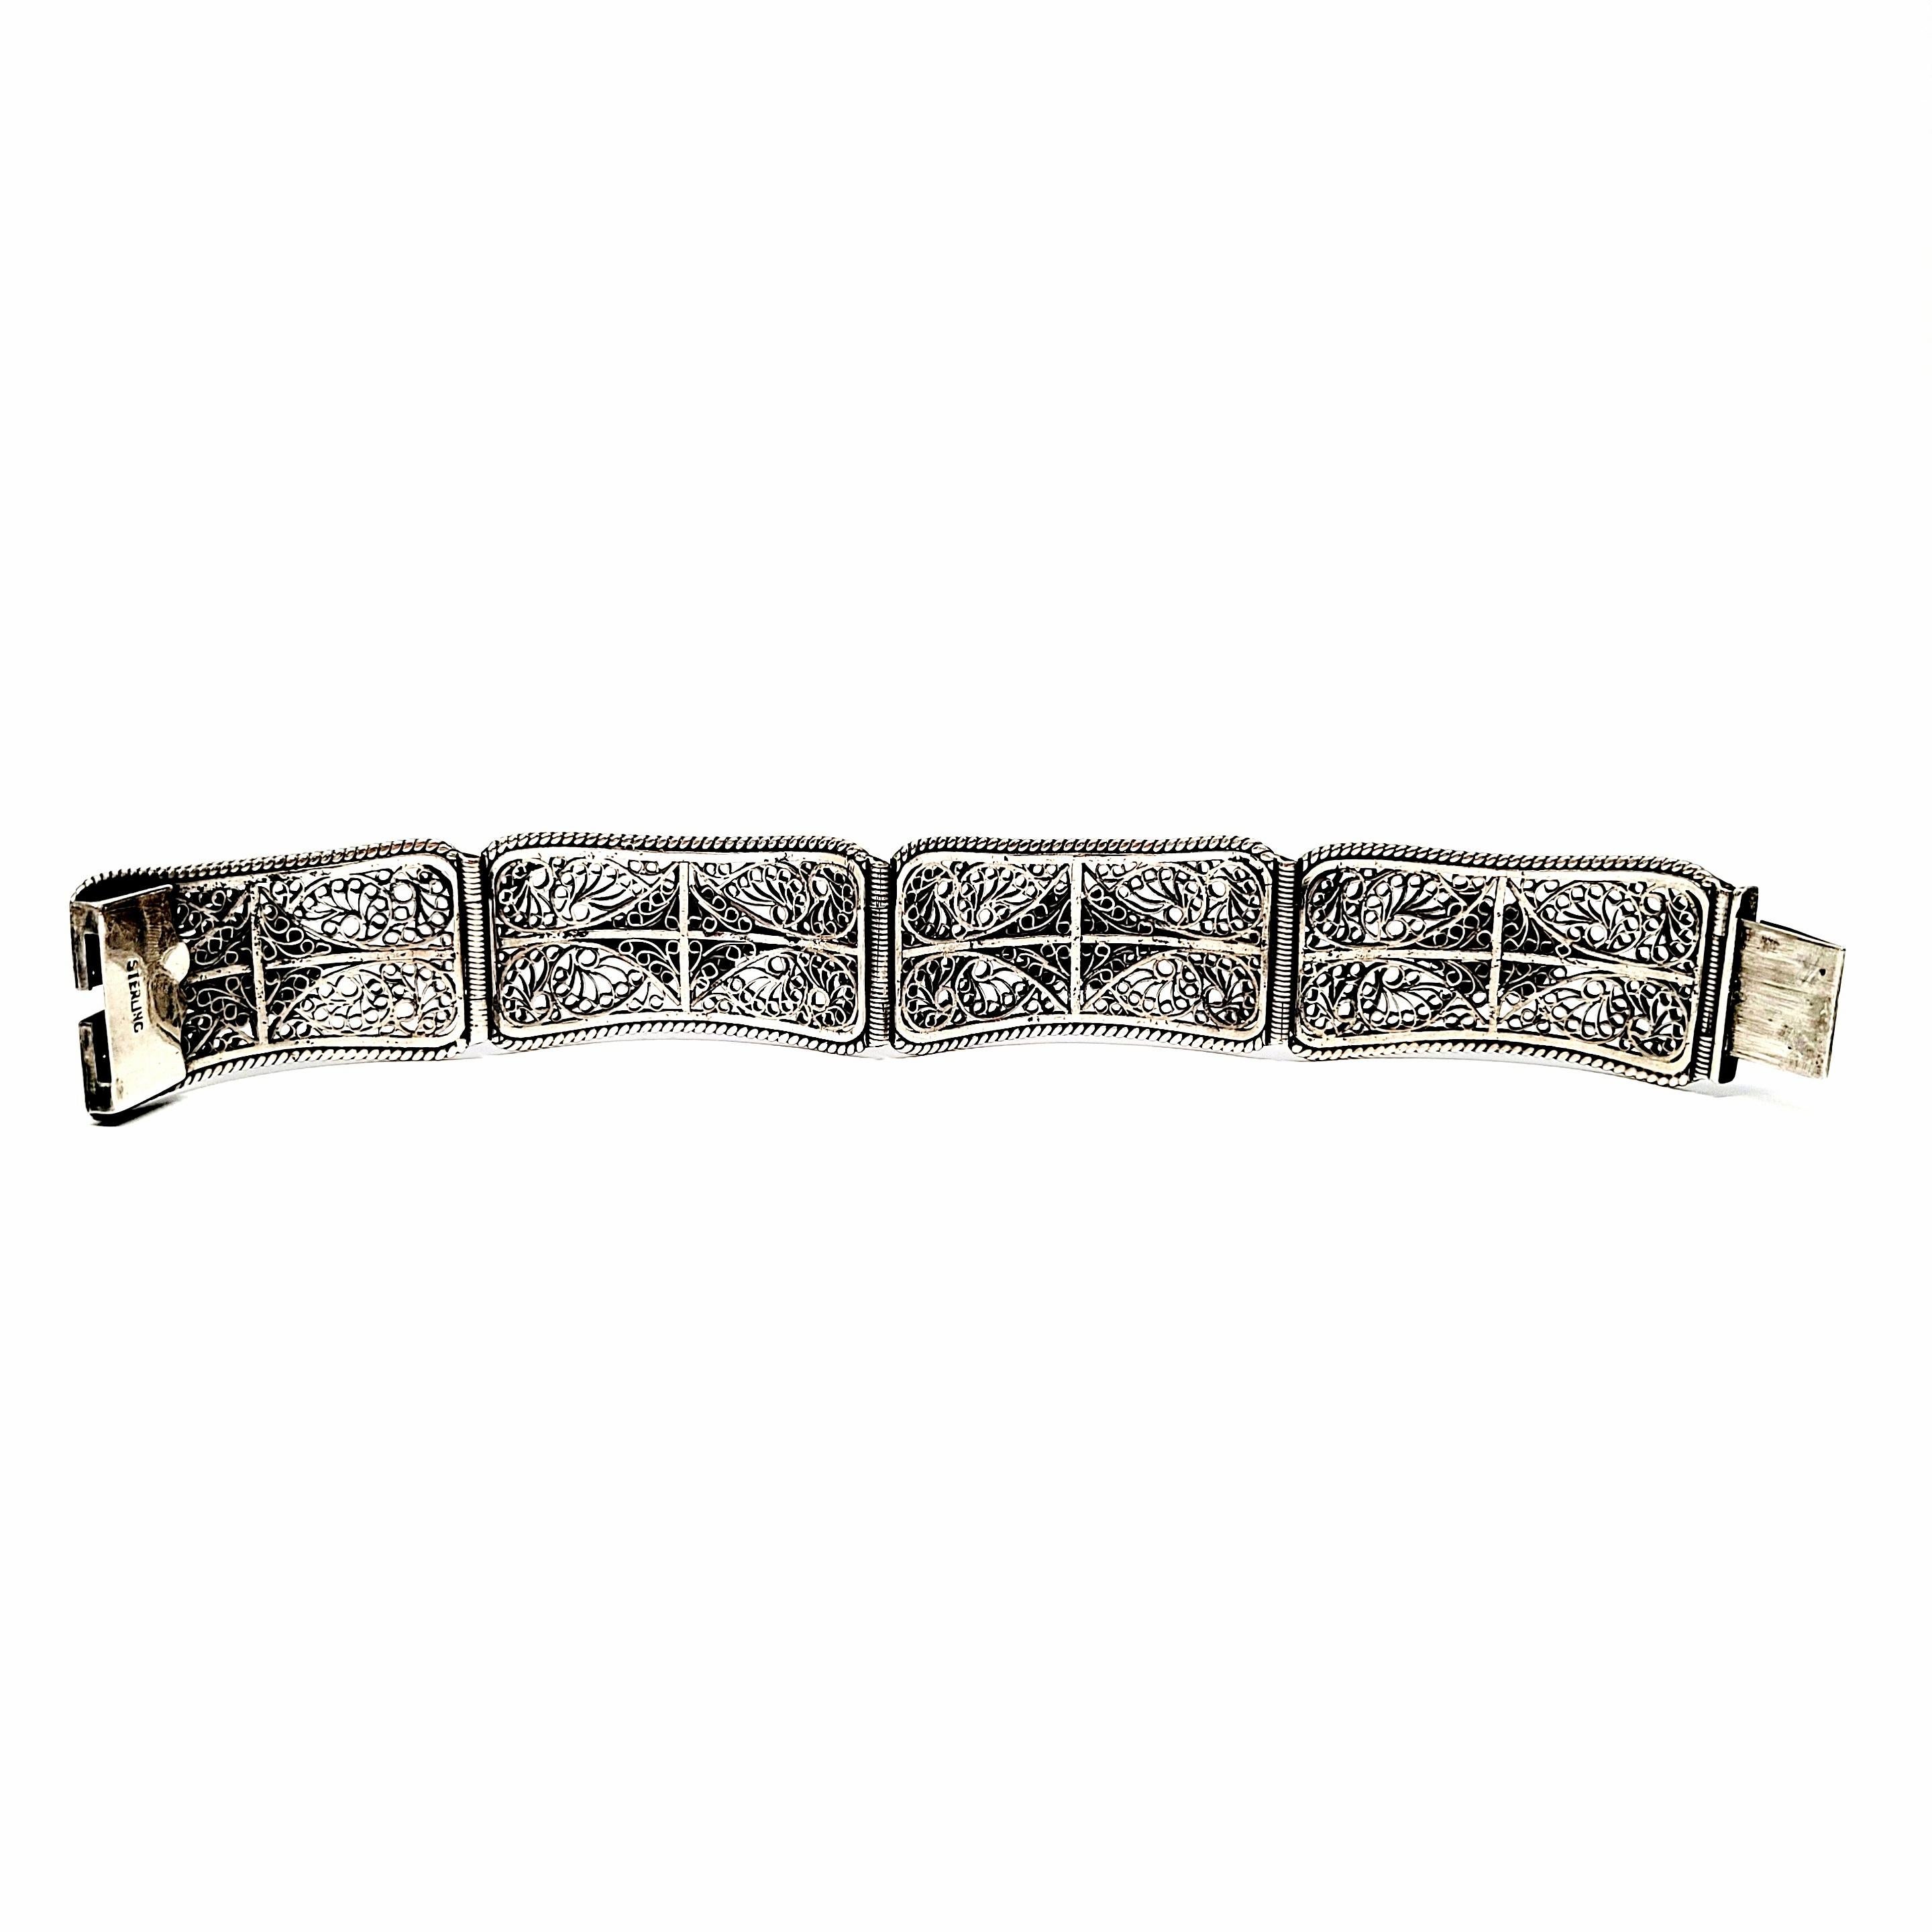 Sterling silver filigree panel bracelet.

4 panel bracelet featuring filigree design and beaded and rope accent applied design. Slide push clasp closure.

Measures approx 6 1/2